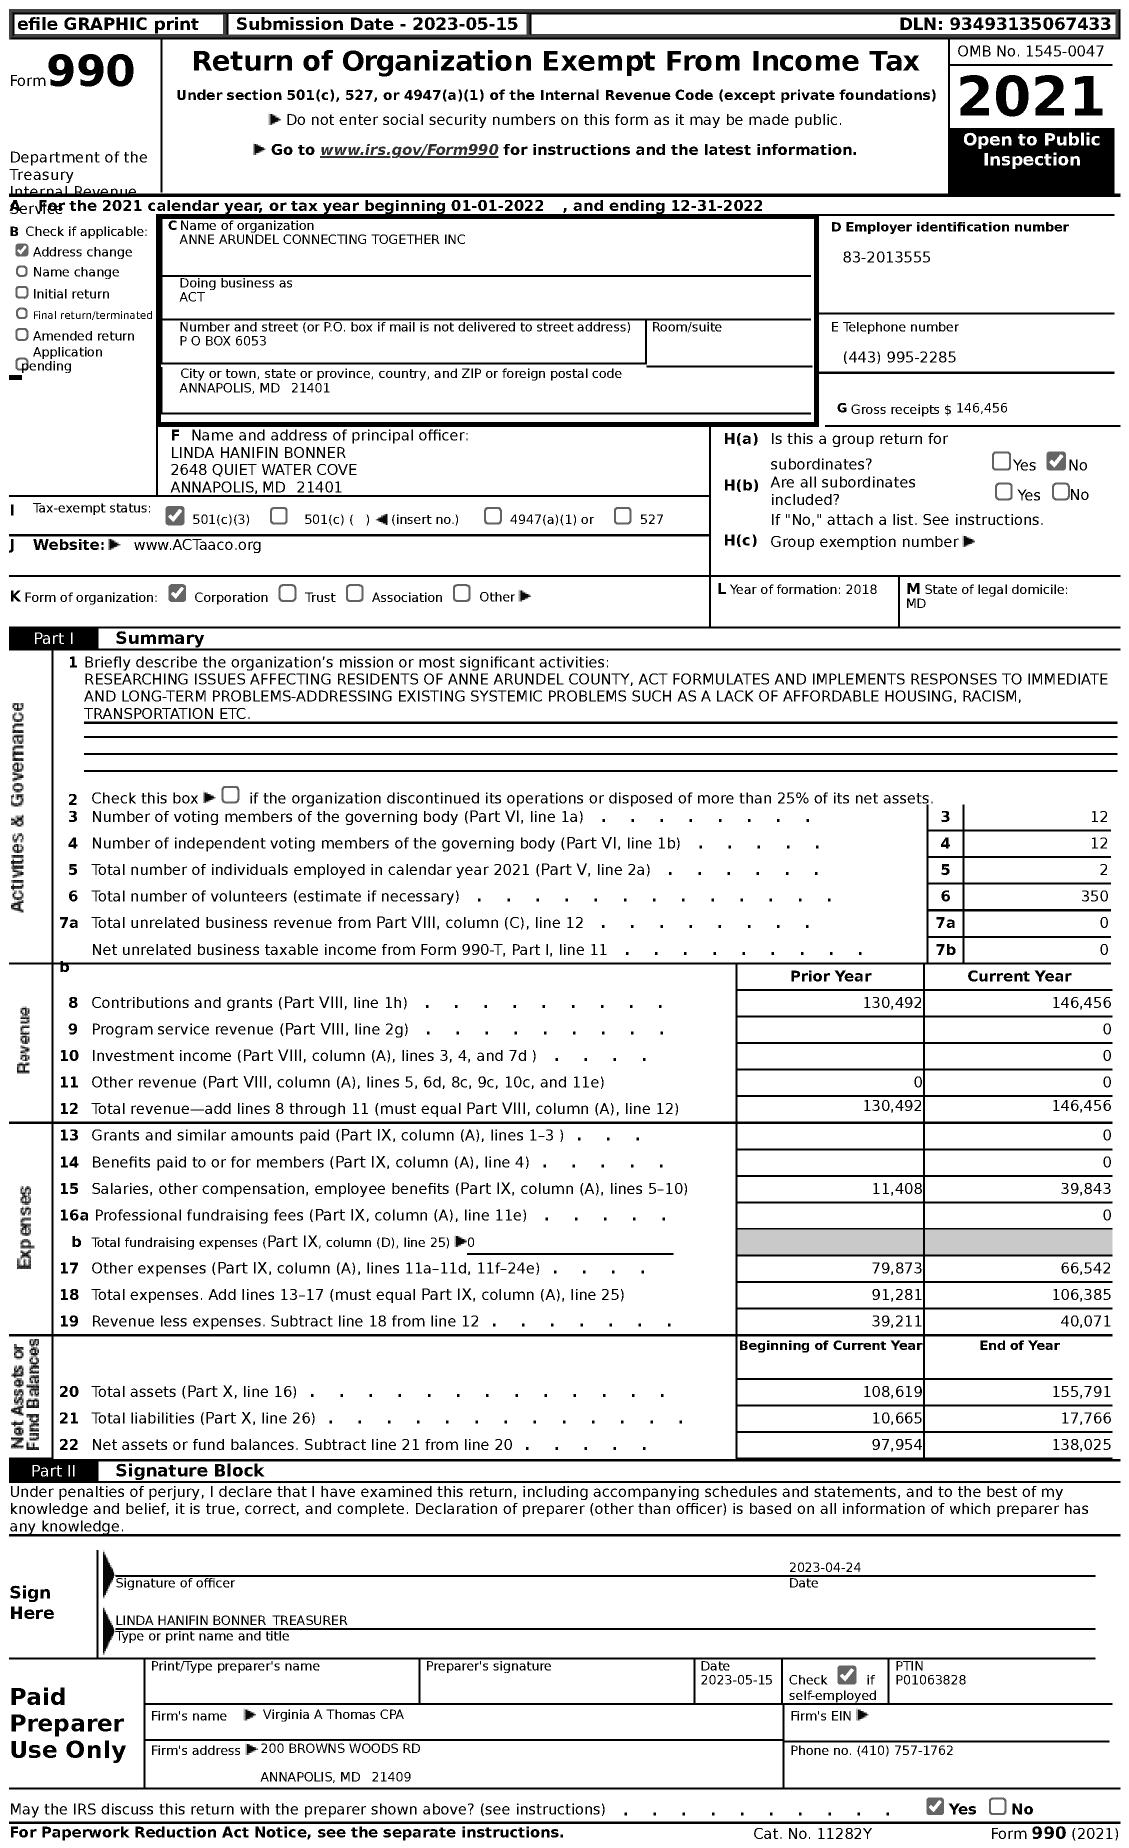 Image of first page of 2022 Form 990 for Anne Arundel Connecting Together (ACT)